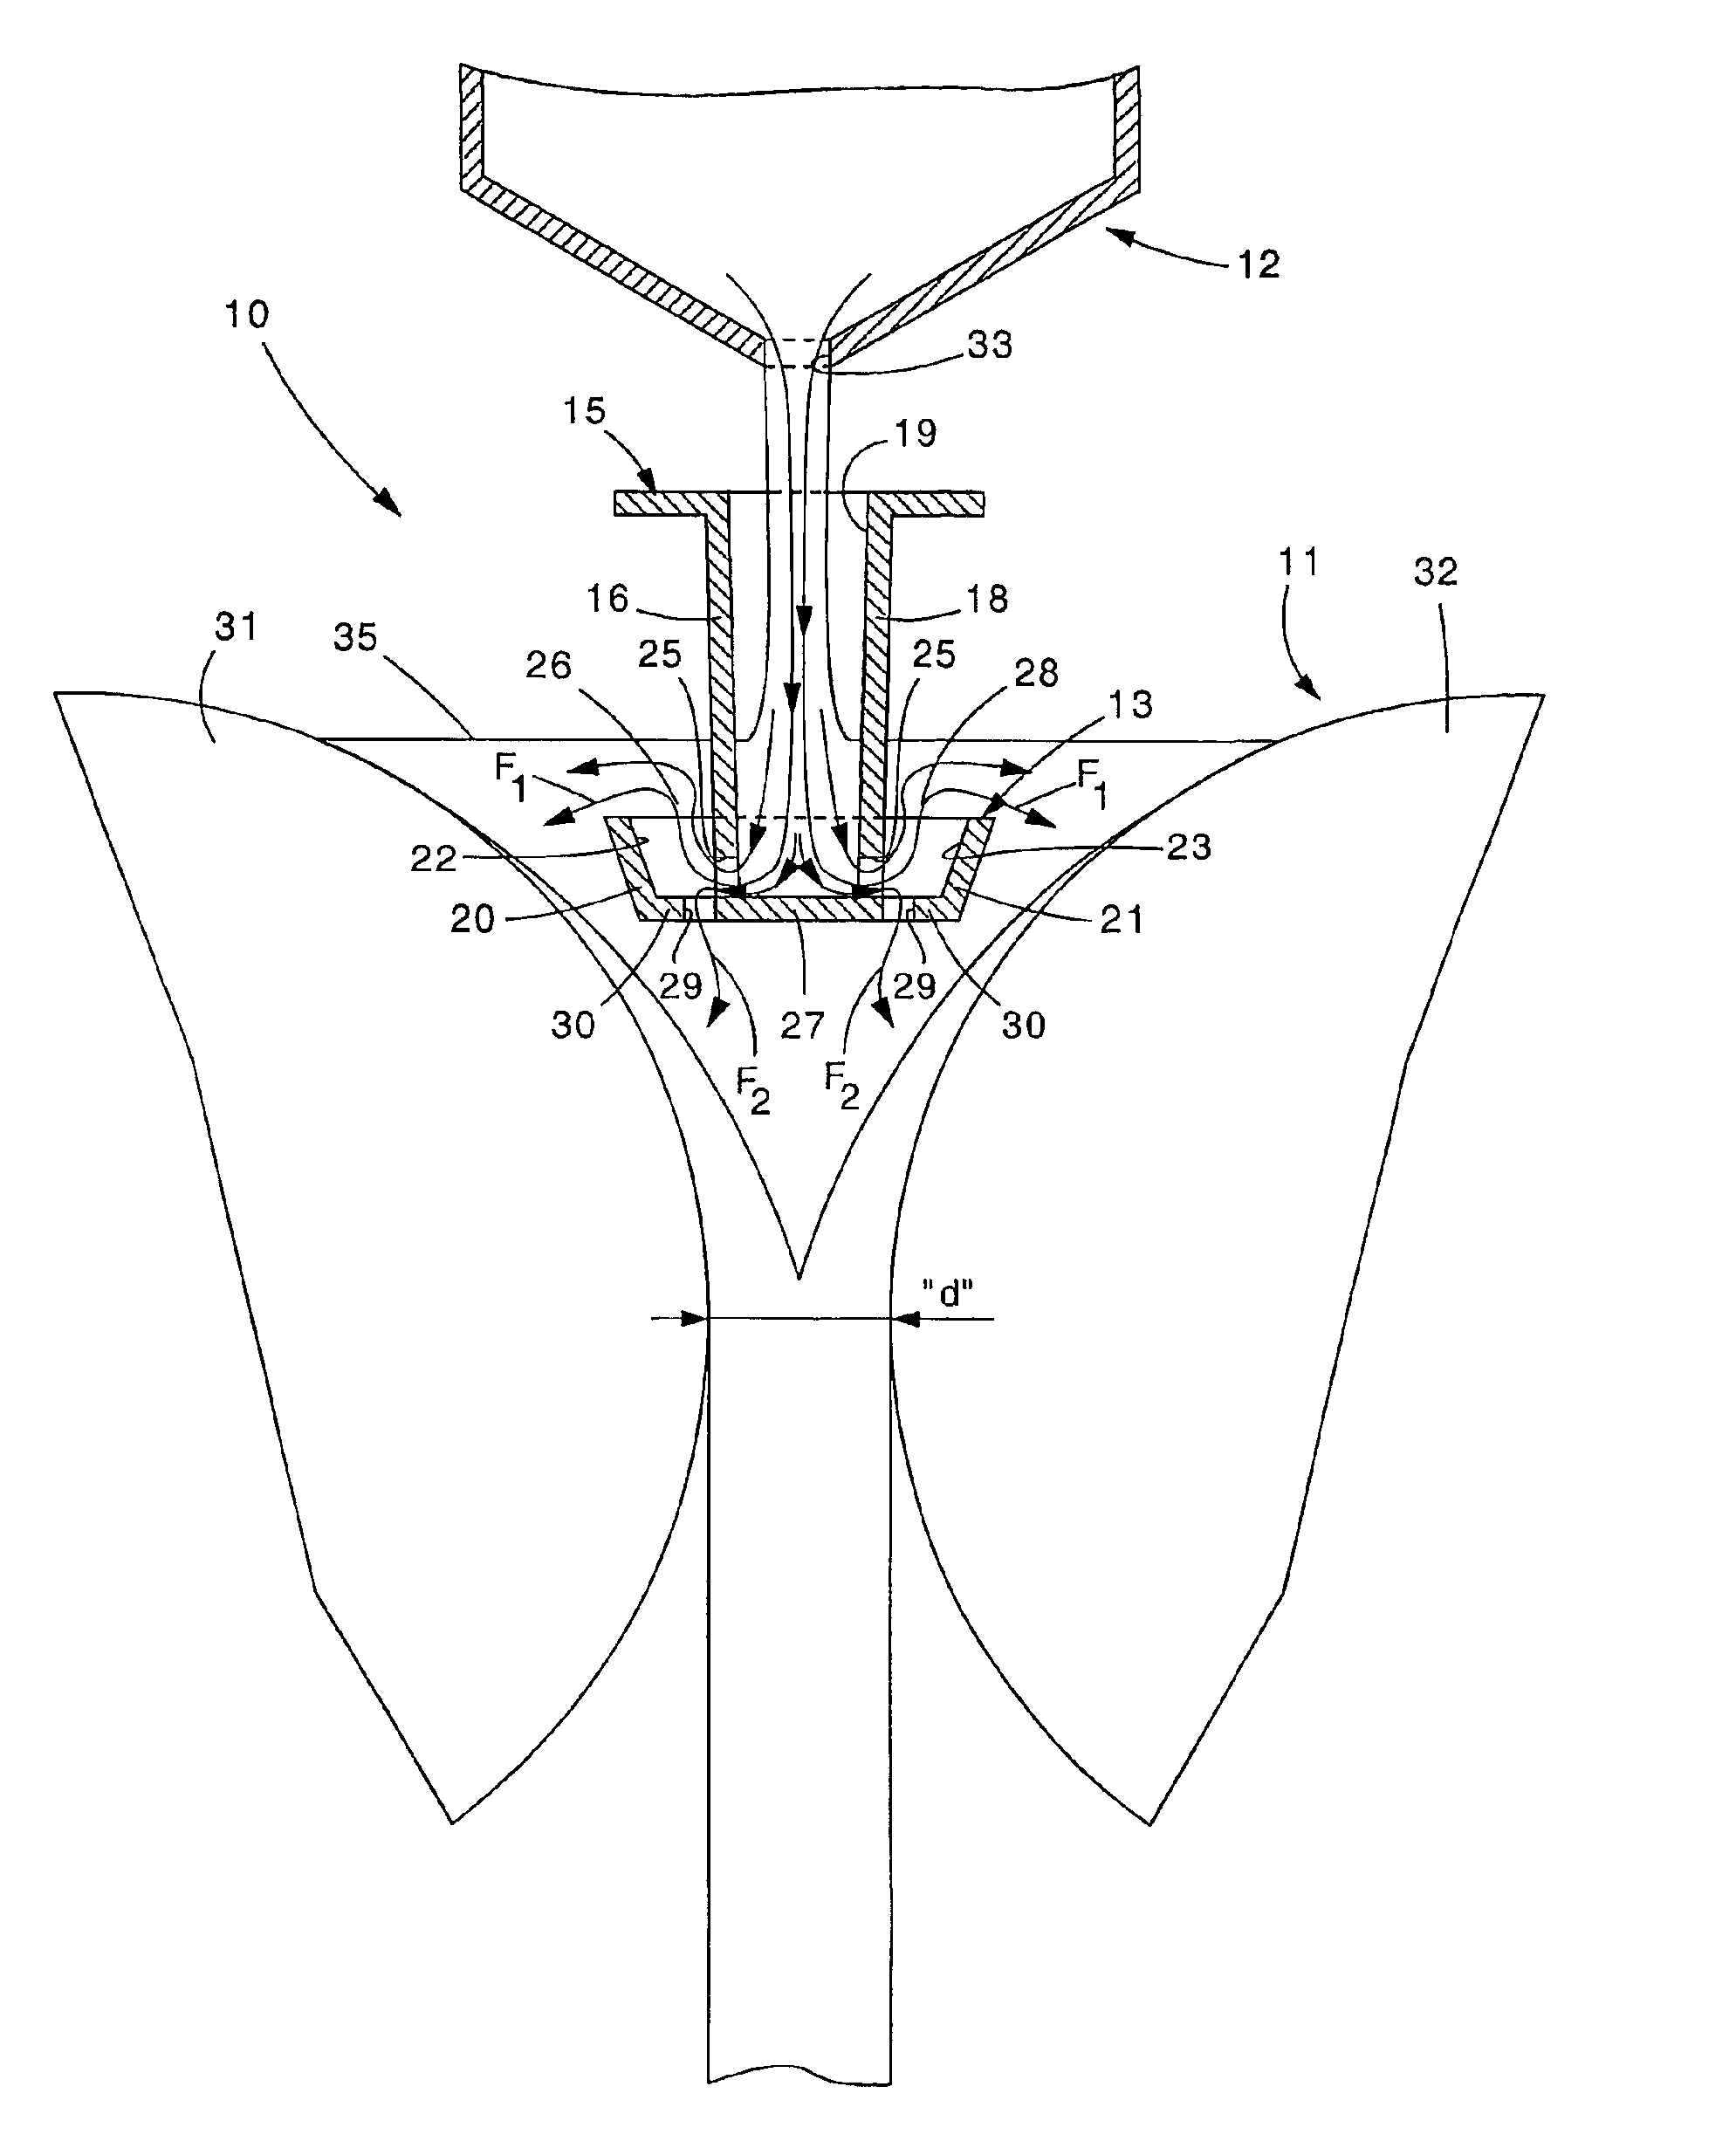 Device to discharge liquid steel from a container to a crystallizer with rollers